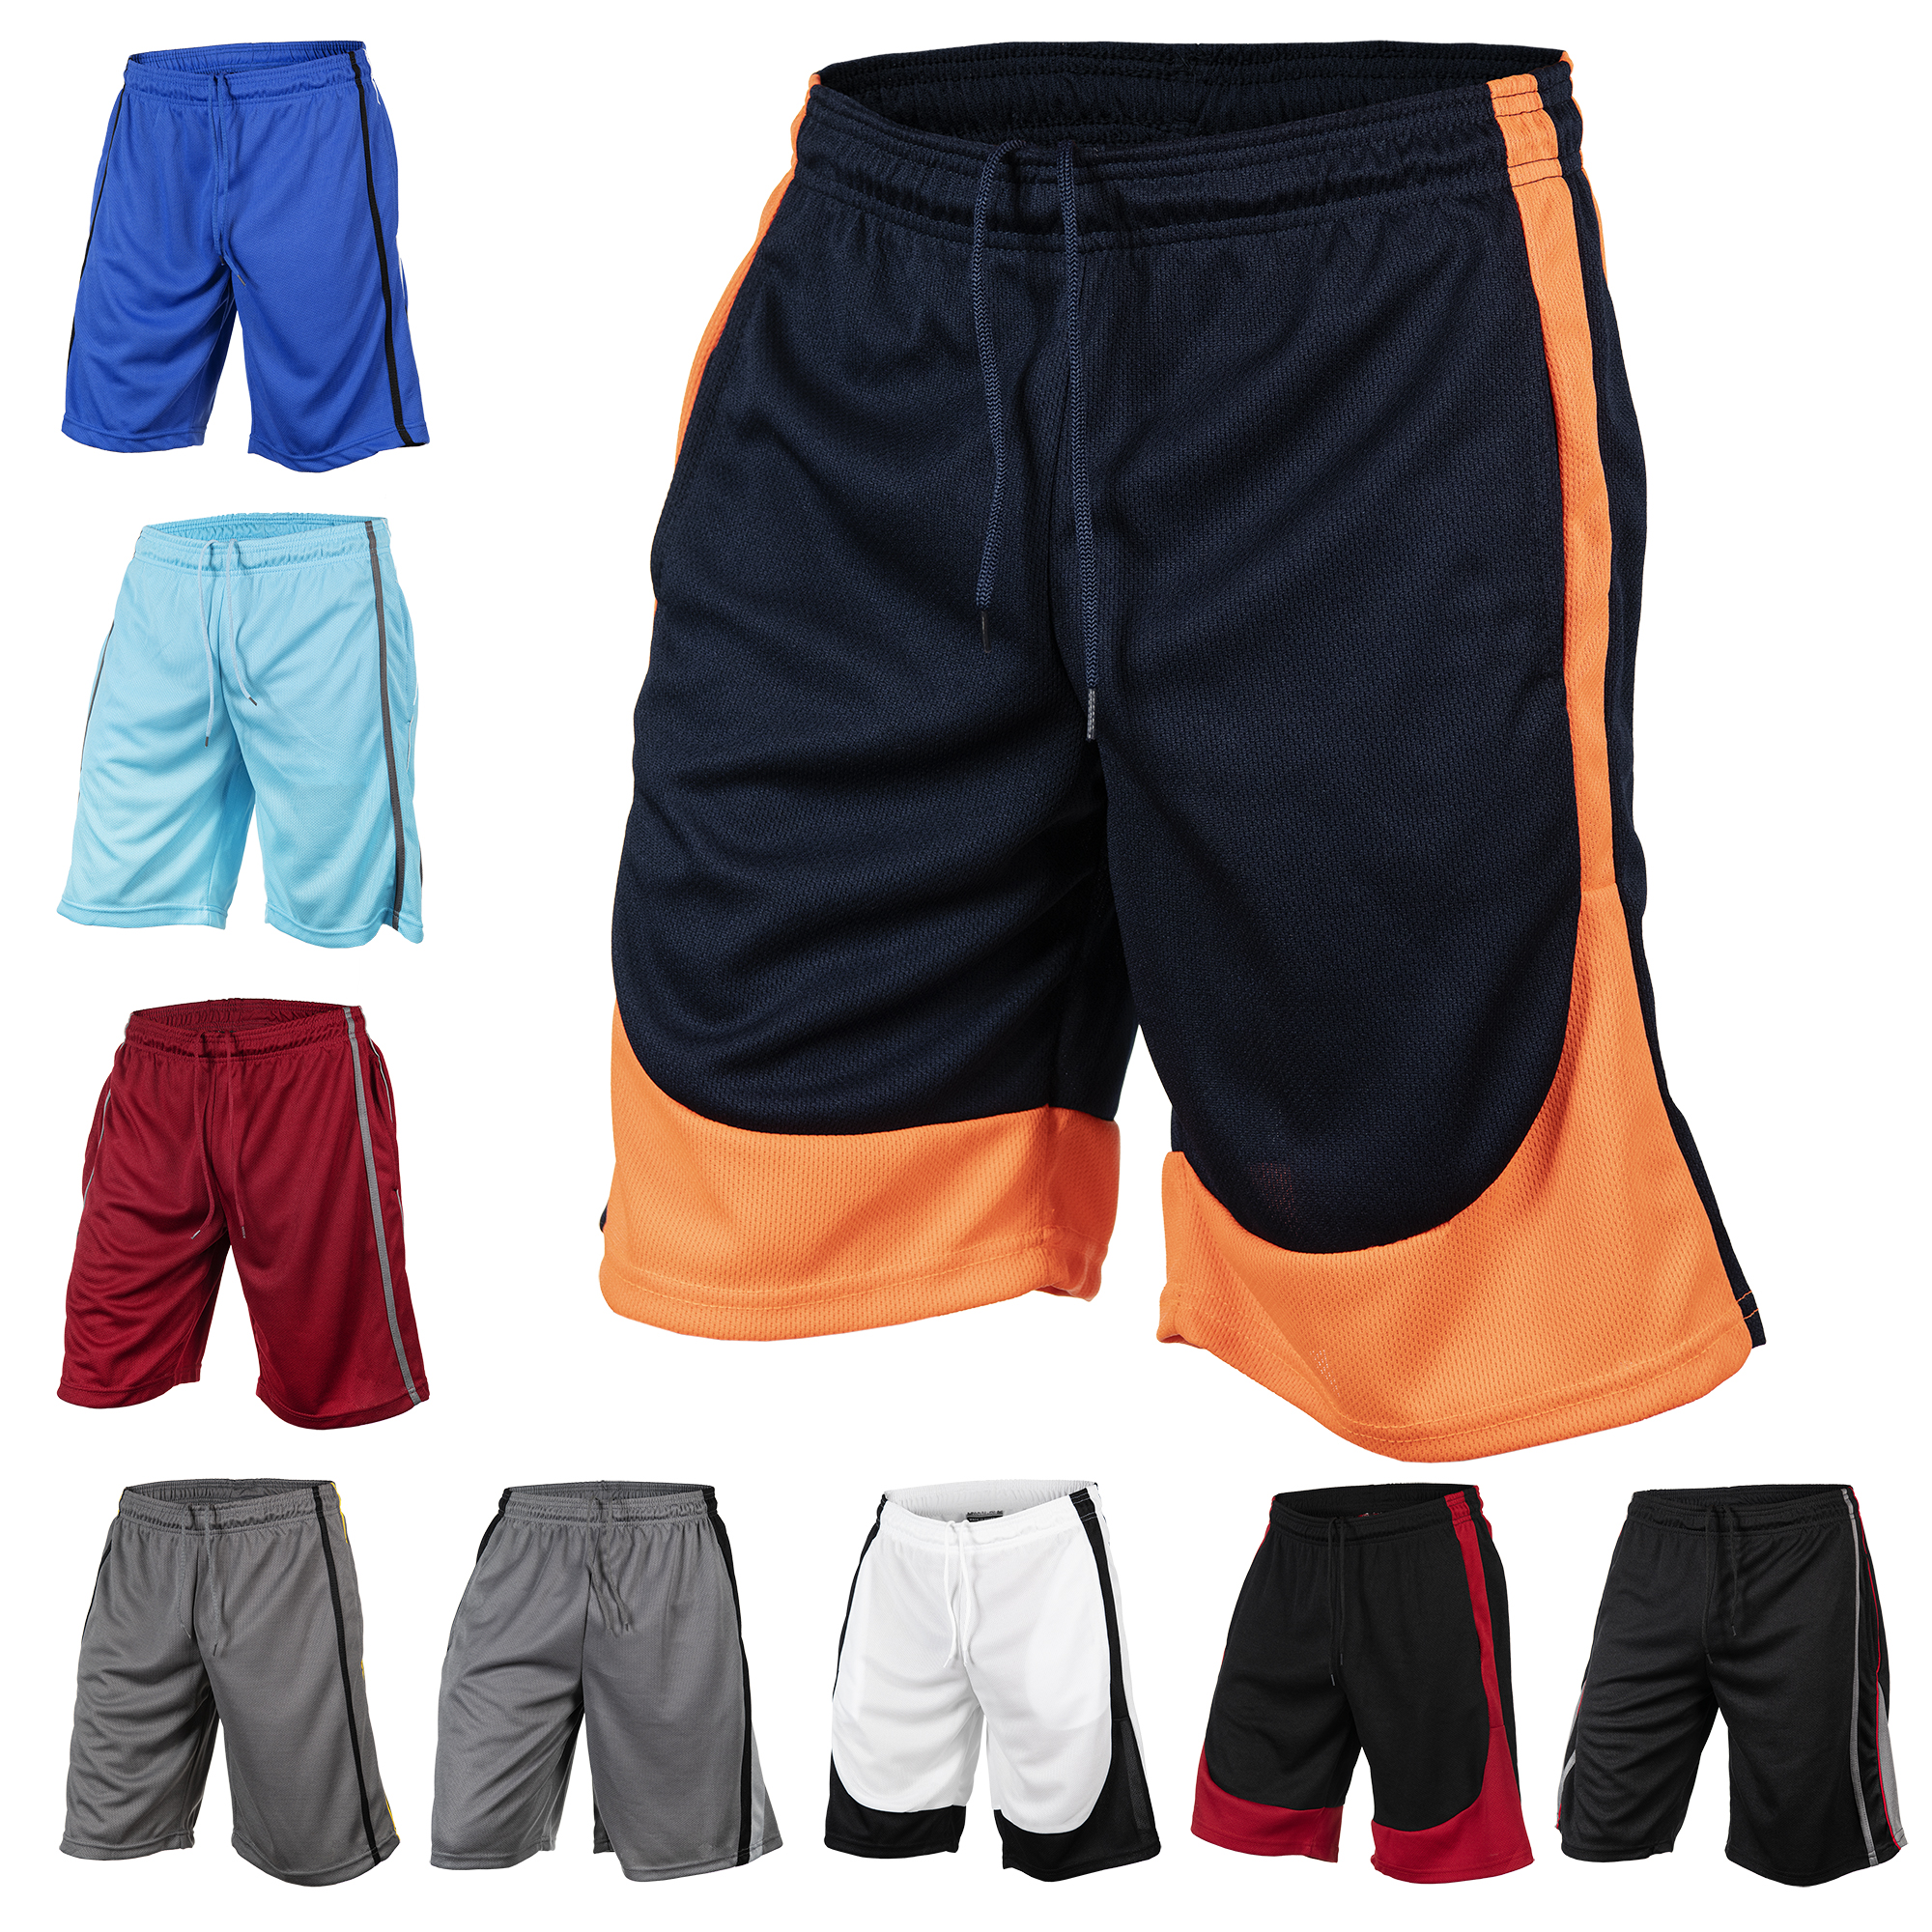 3-6 Packs Men's Mesh 2-Tone Basketball Shorts With Pockets Gym Activewear Assorted Colors (L, 6 Pack) - image 1 of 8